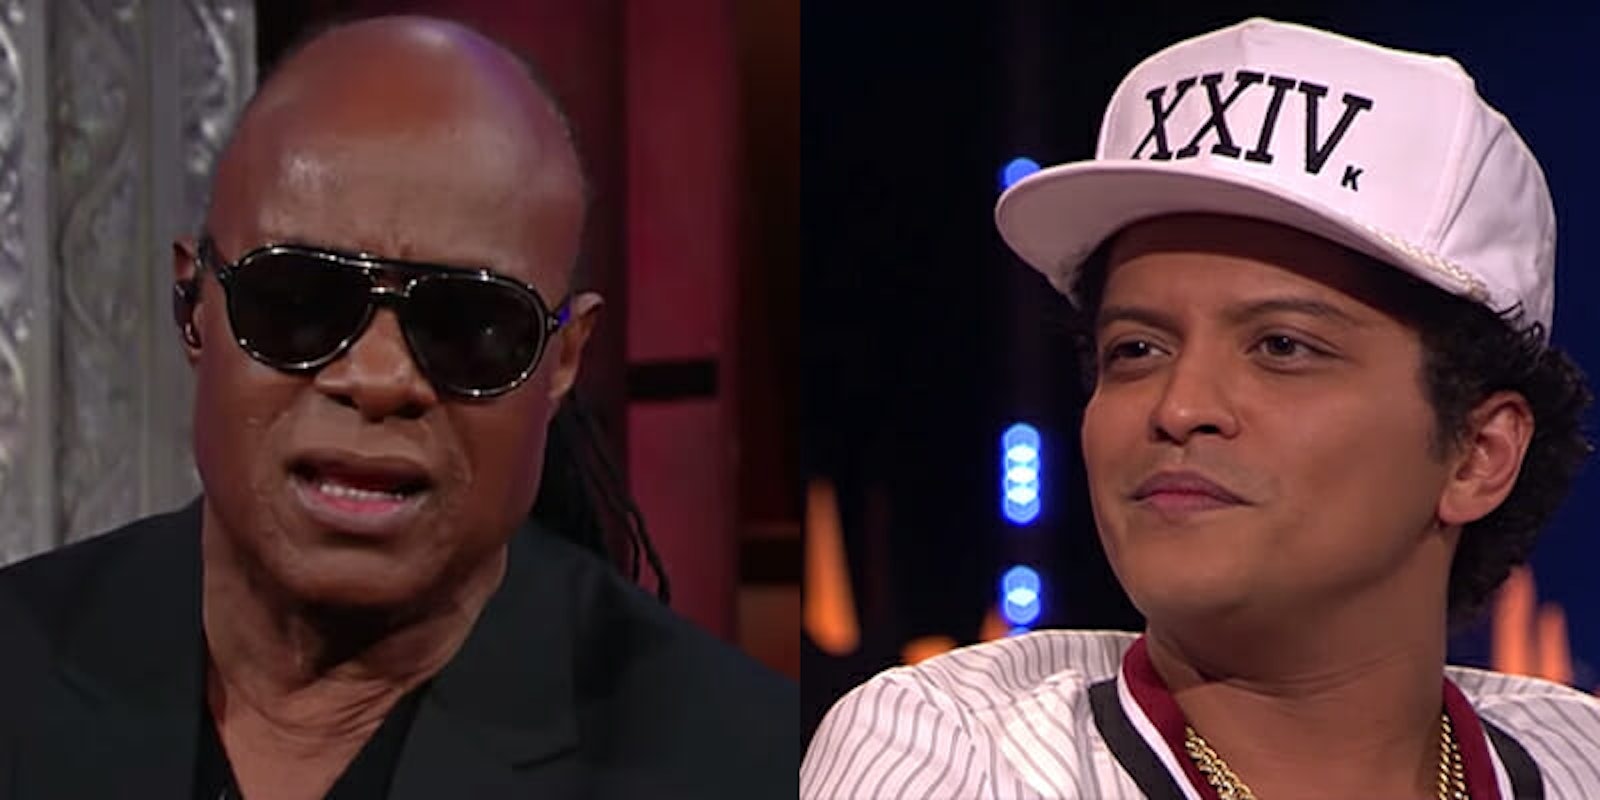 Stevie Wonder defended Bruno Mars against accusations of cultural appropriation.